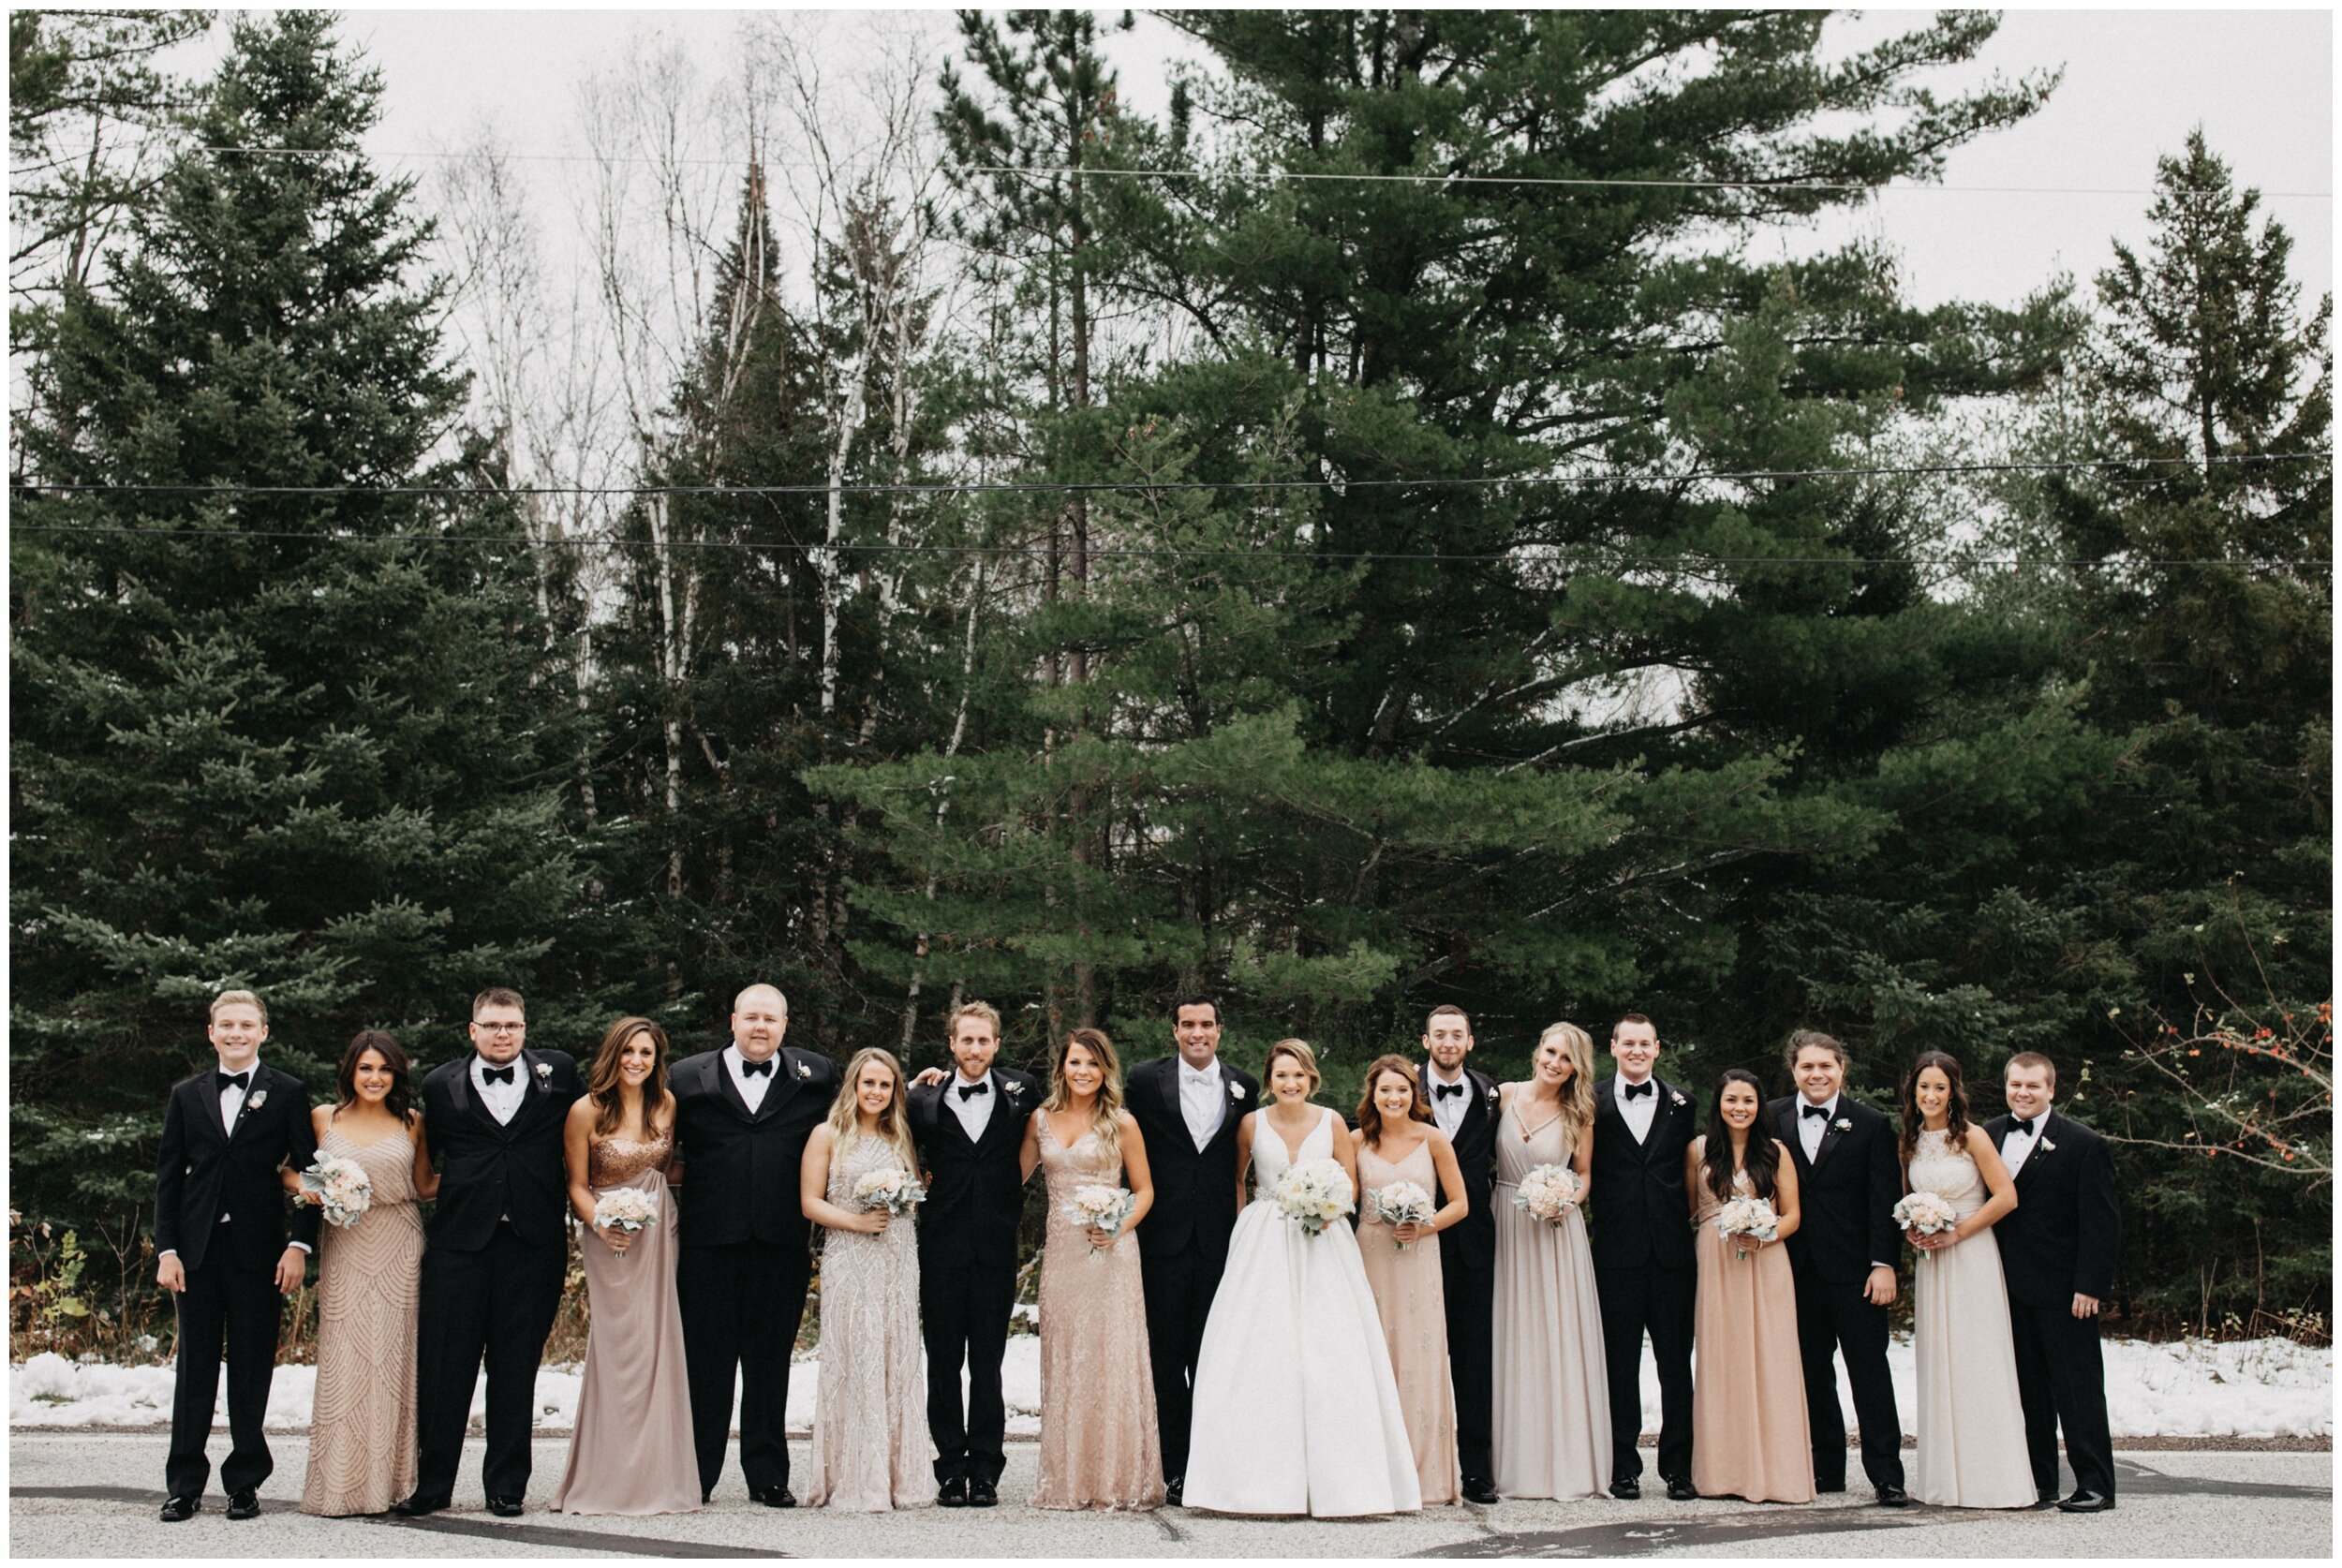 Bride and groom with wedding party standing in front of pine trees in Duluth, Minnesota